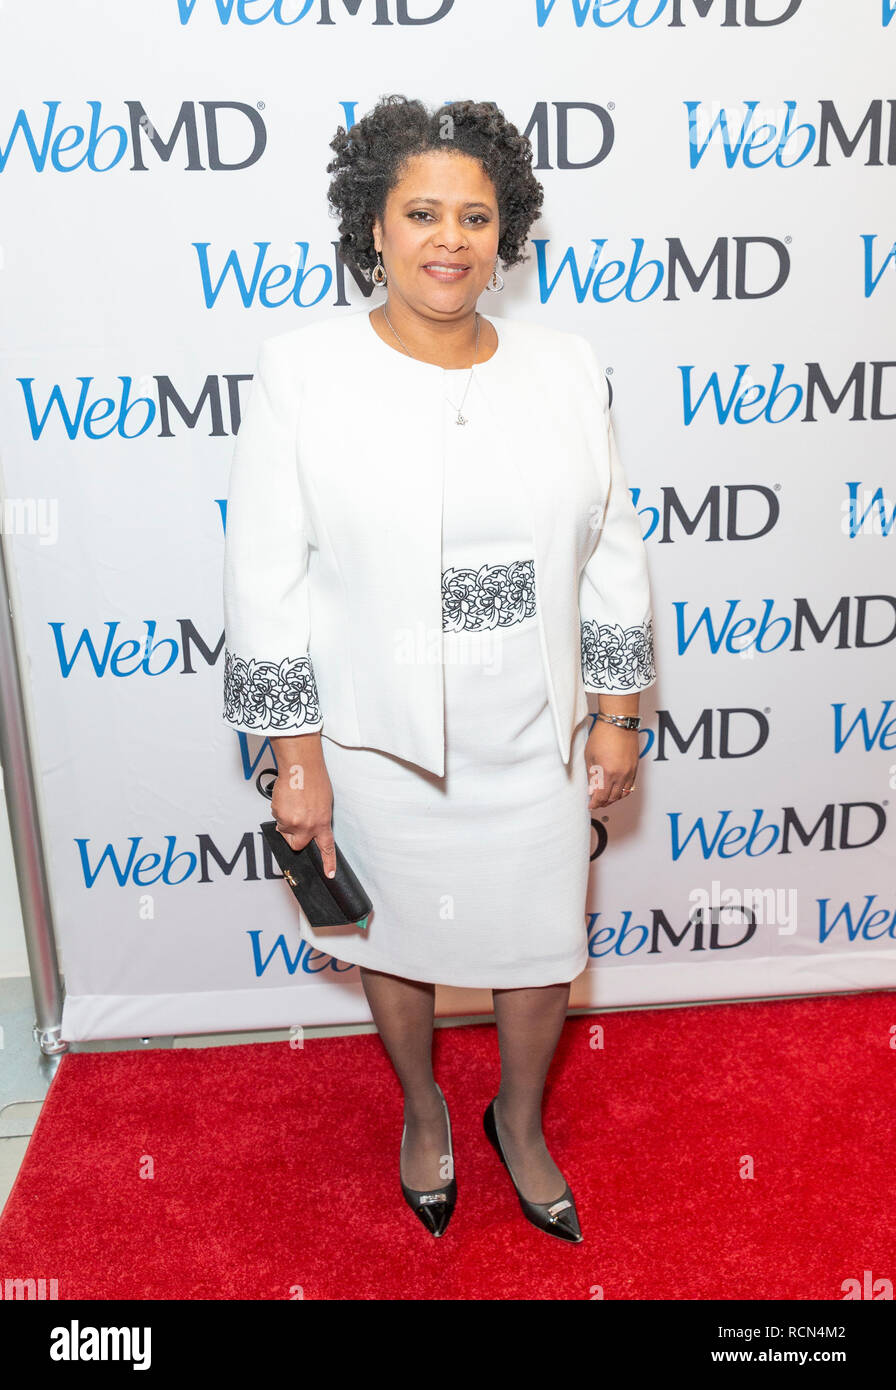 New York, United States. 15th Jan, 2019. New York, NY - January 15, 2019: Doctor Karen Winkfield attends WebMD Health Hero Awards ceremony at WebMD Corporate Headquarter Credit: lev radin/Alamy Live News Stock Photo